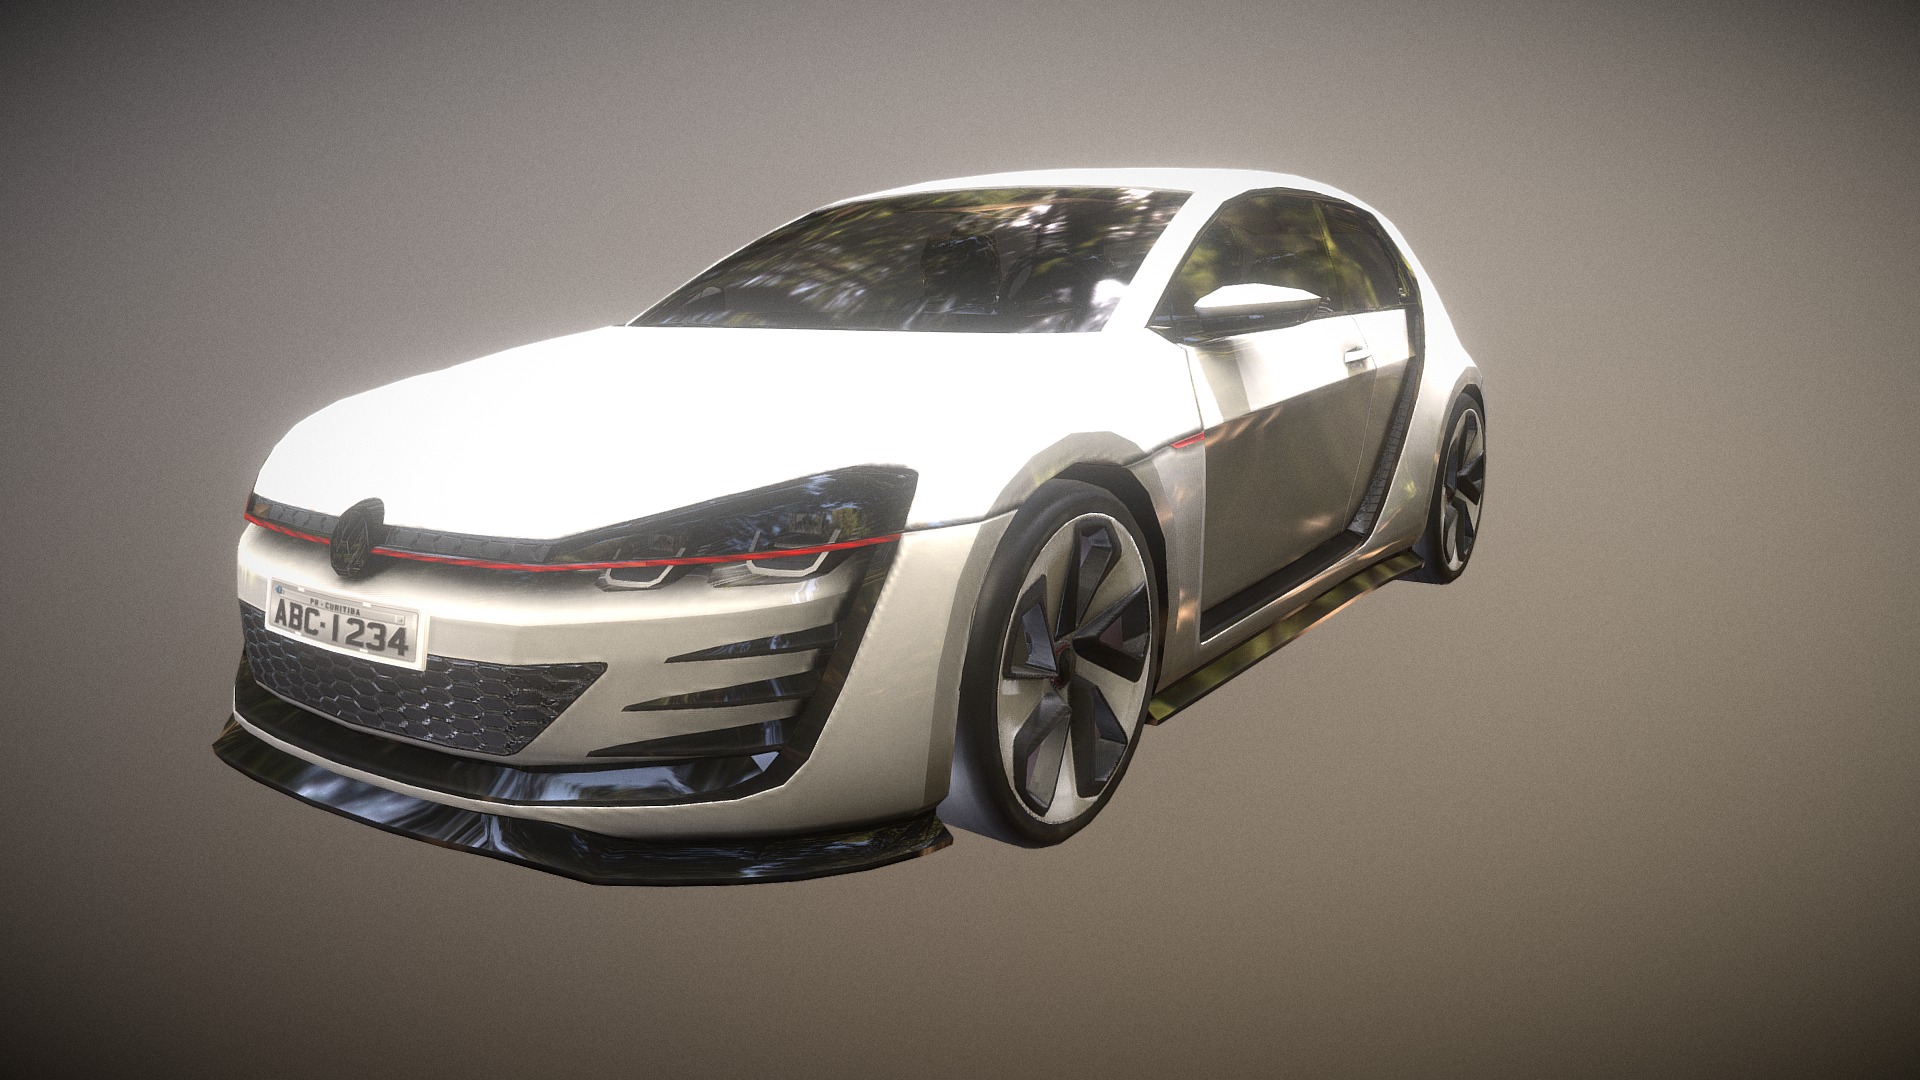 3D model Golf Vision - This is a 3D model of the Golf Vision. The 3D model is about a silver sports car.